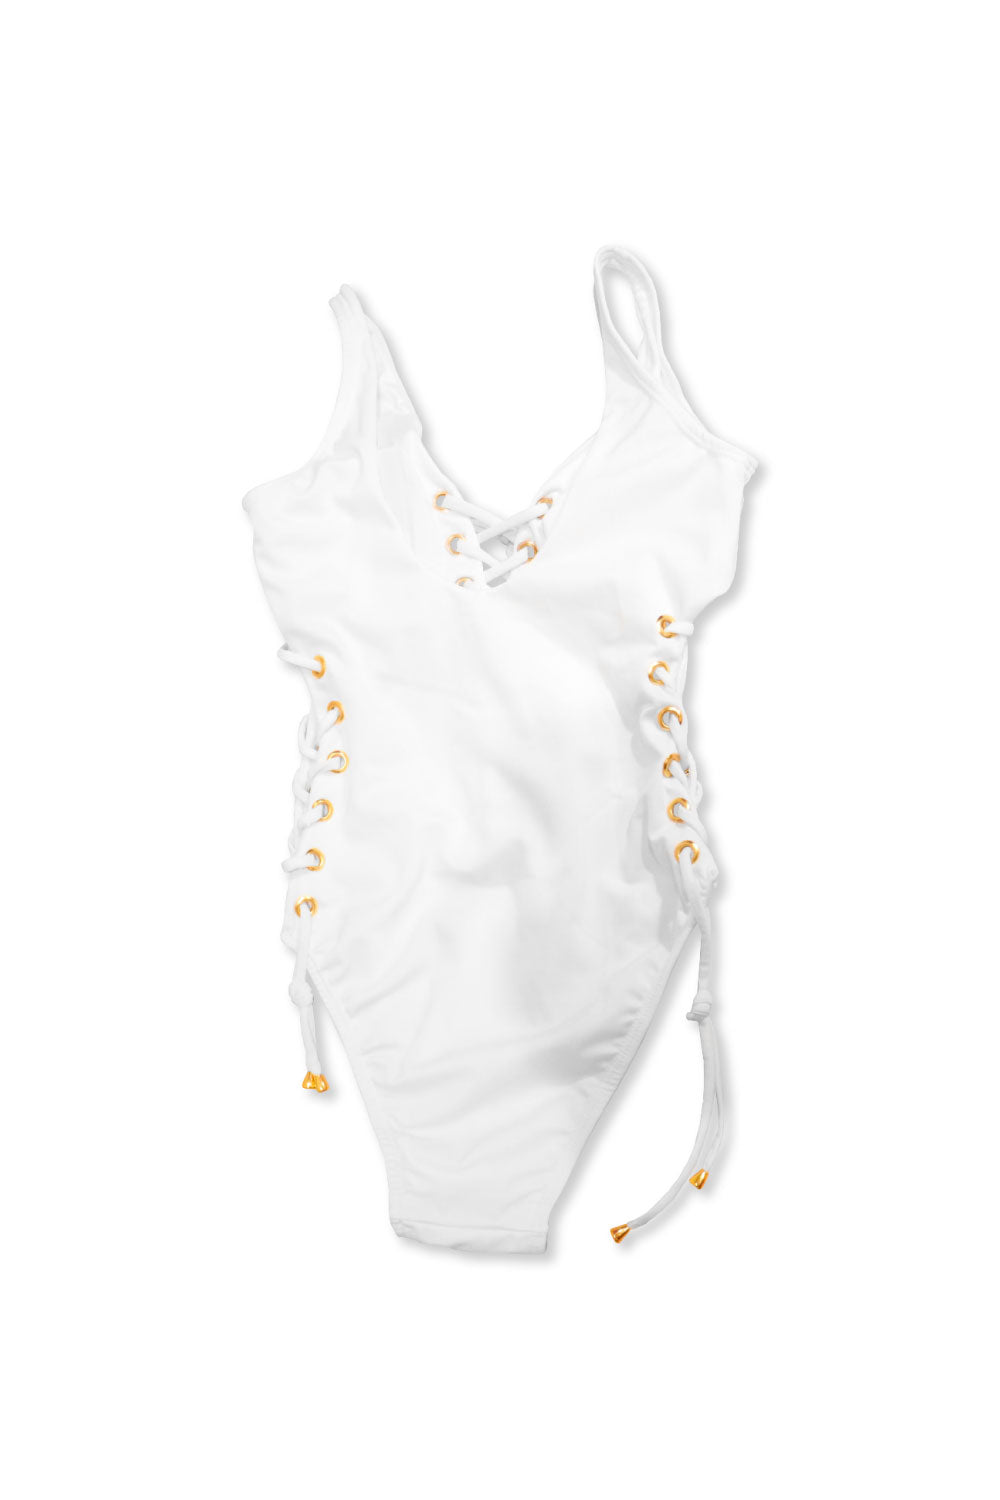 Image of the back of Lateen's Open-Sided One Piece Swimsuit in White.